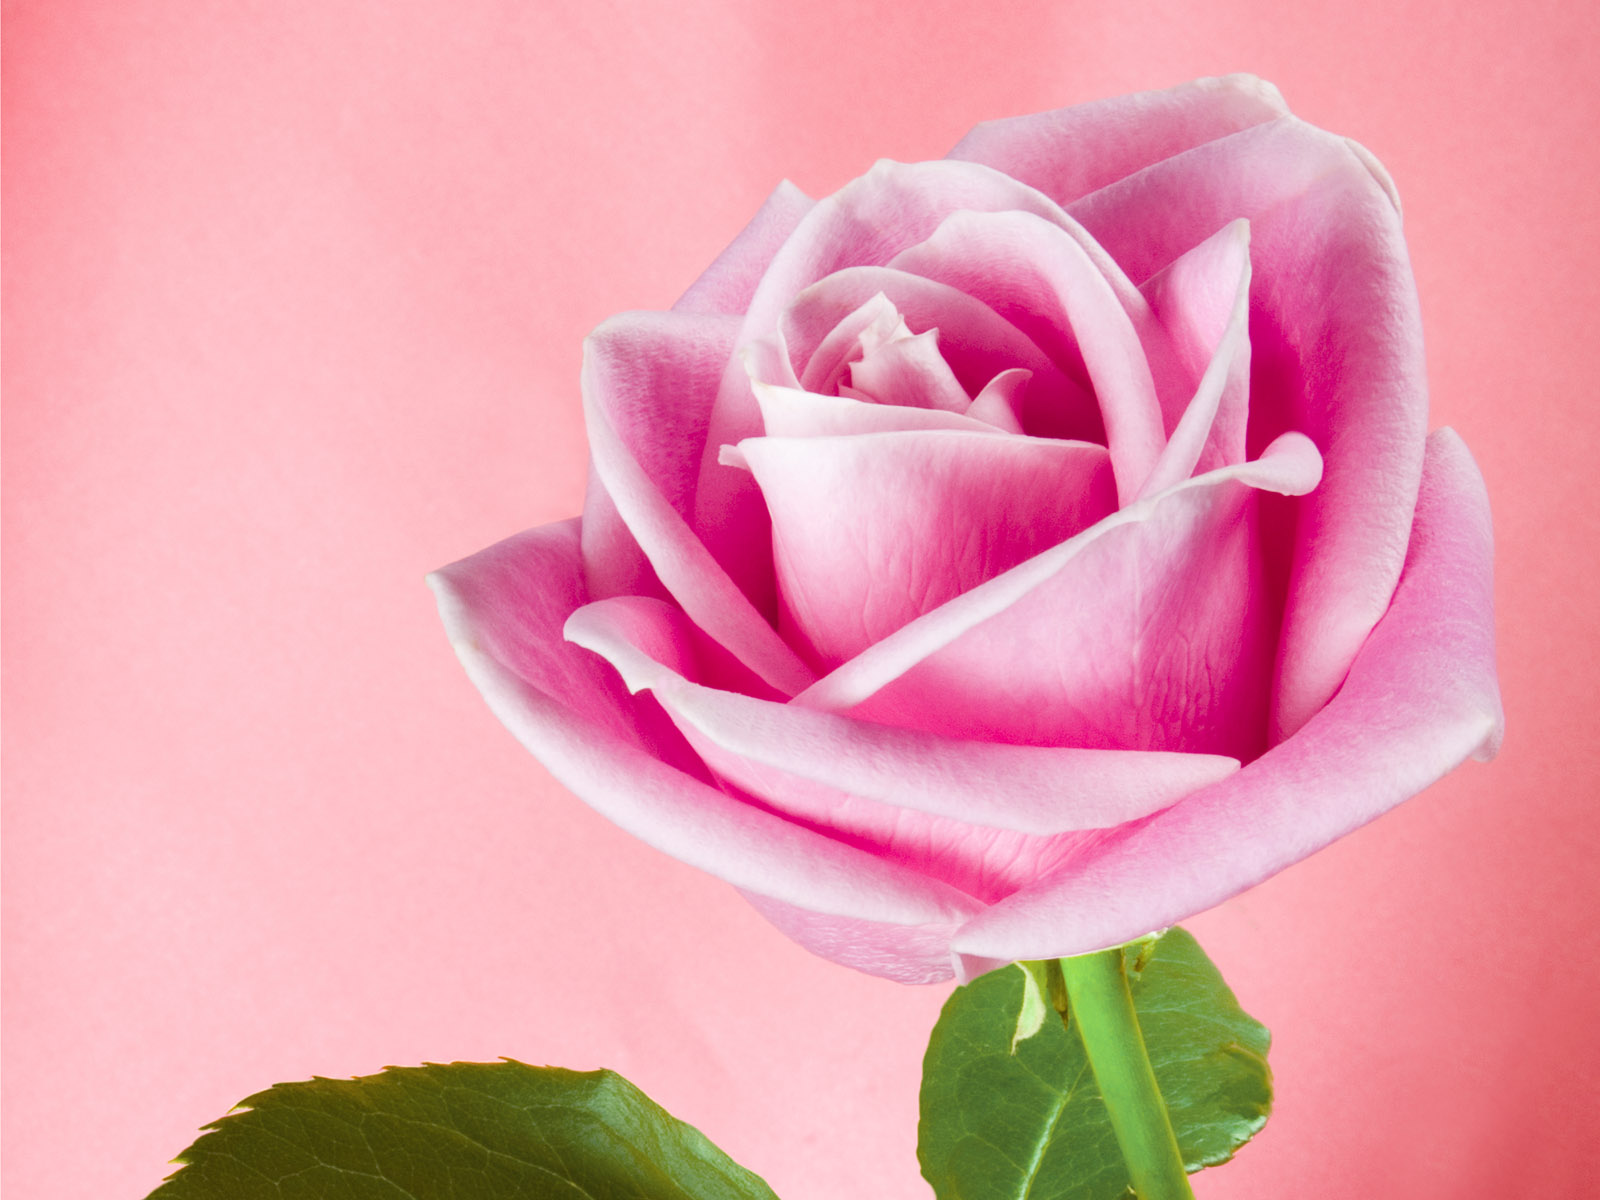  pink roses pink roses background free wallpapers download free